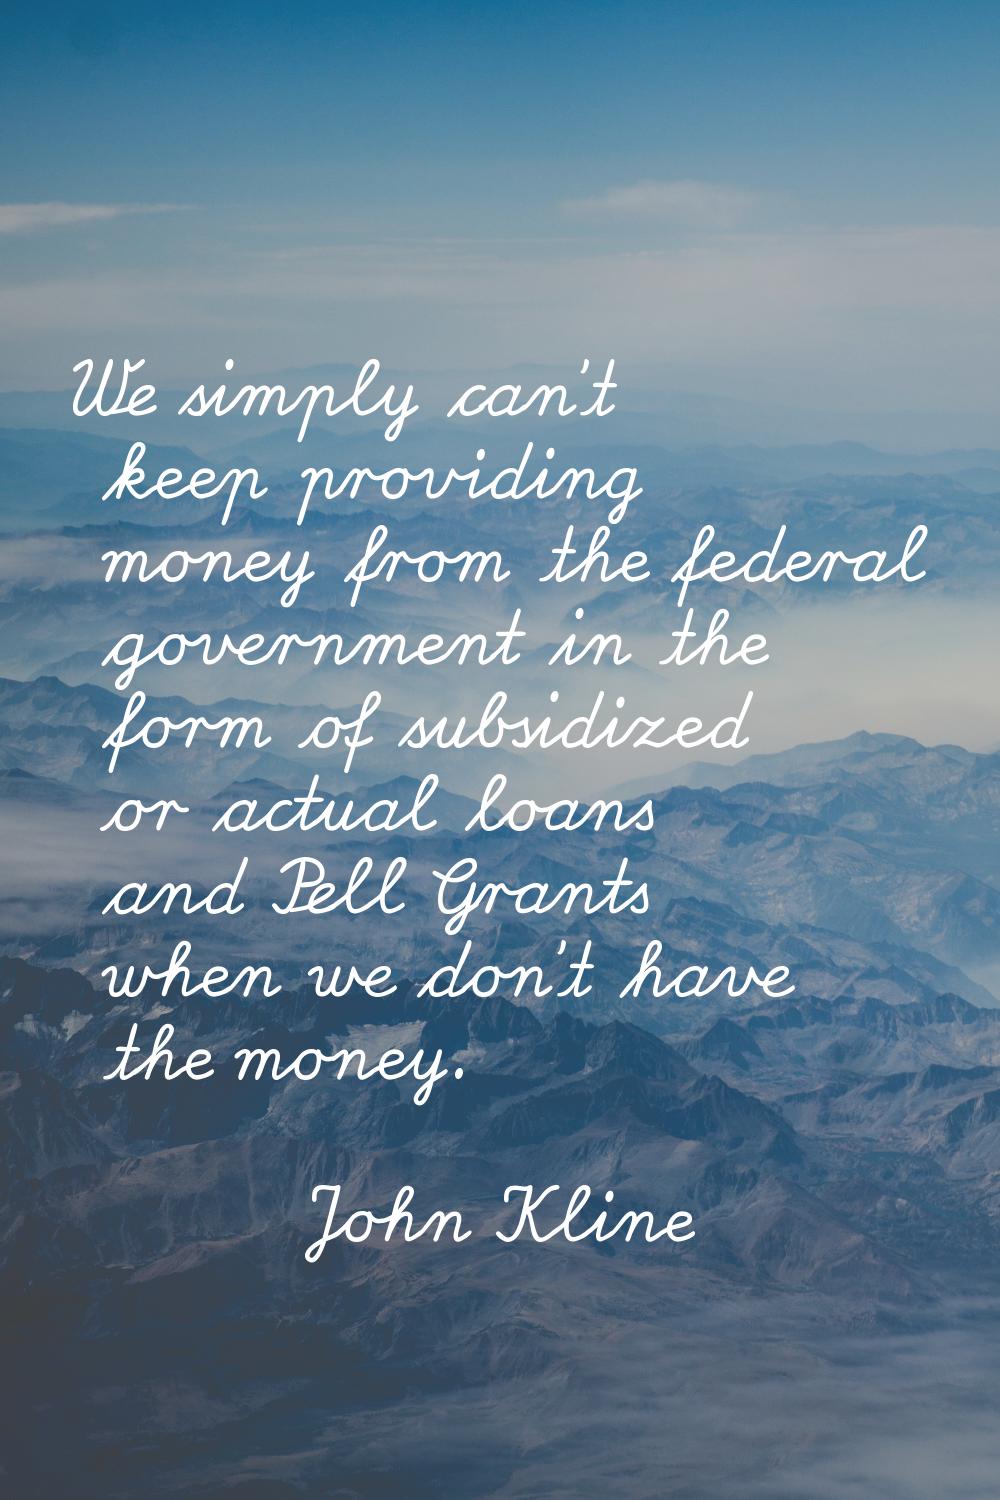 We simply can't keep providing money from the federal government in the form of subsidized or actua